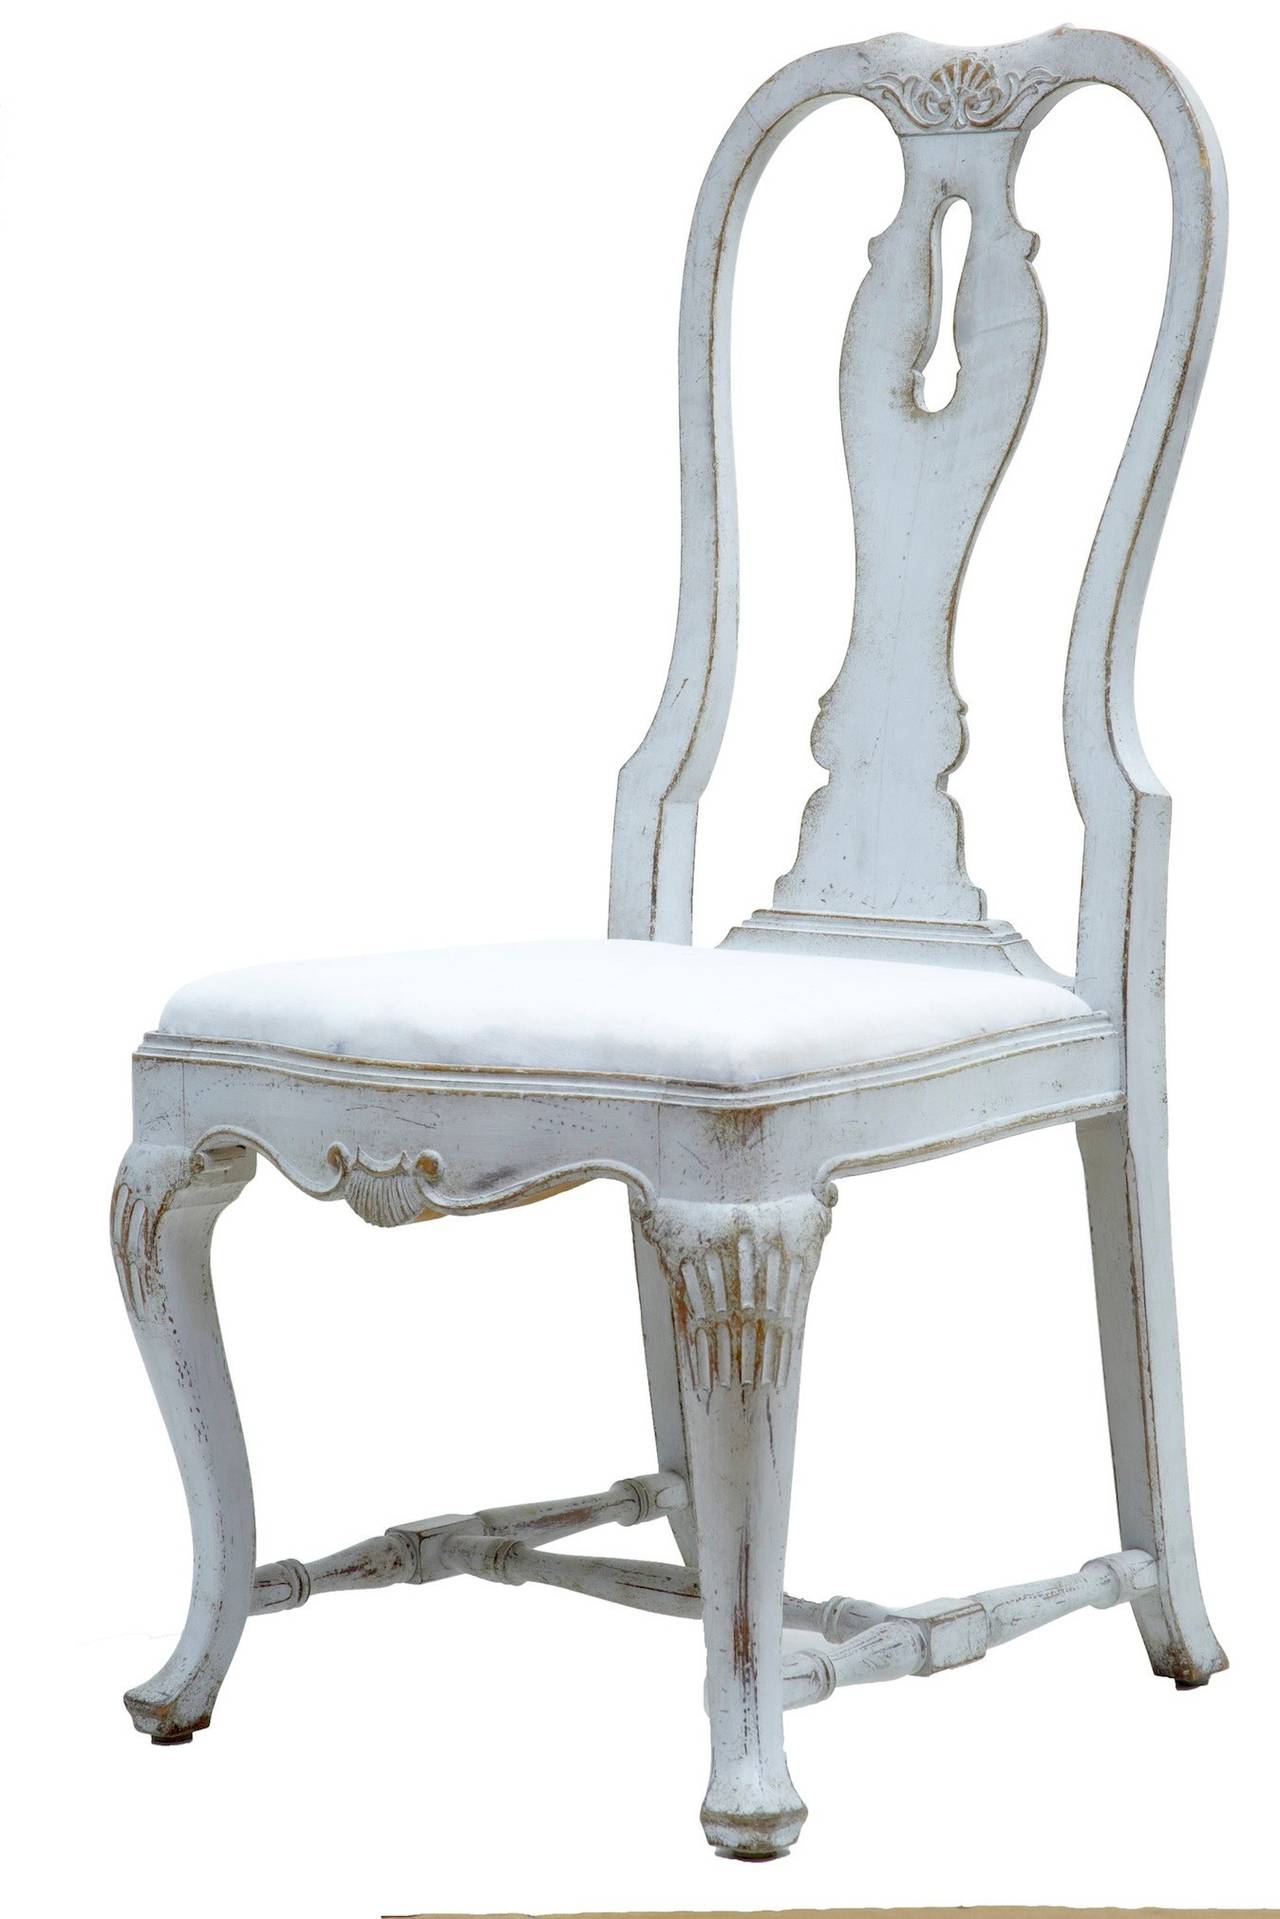 Stunning large rare set of 12 queen anne influenced dining chairs circa 1880. 

Carving to the backs, knees and stylised shells on the front rail. Standing on a pad foot to the front. 

Upholstered in calico ready to be covered in a fabric of